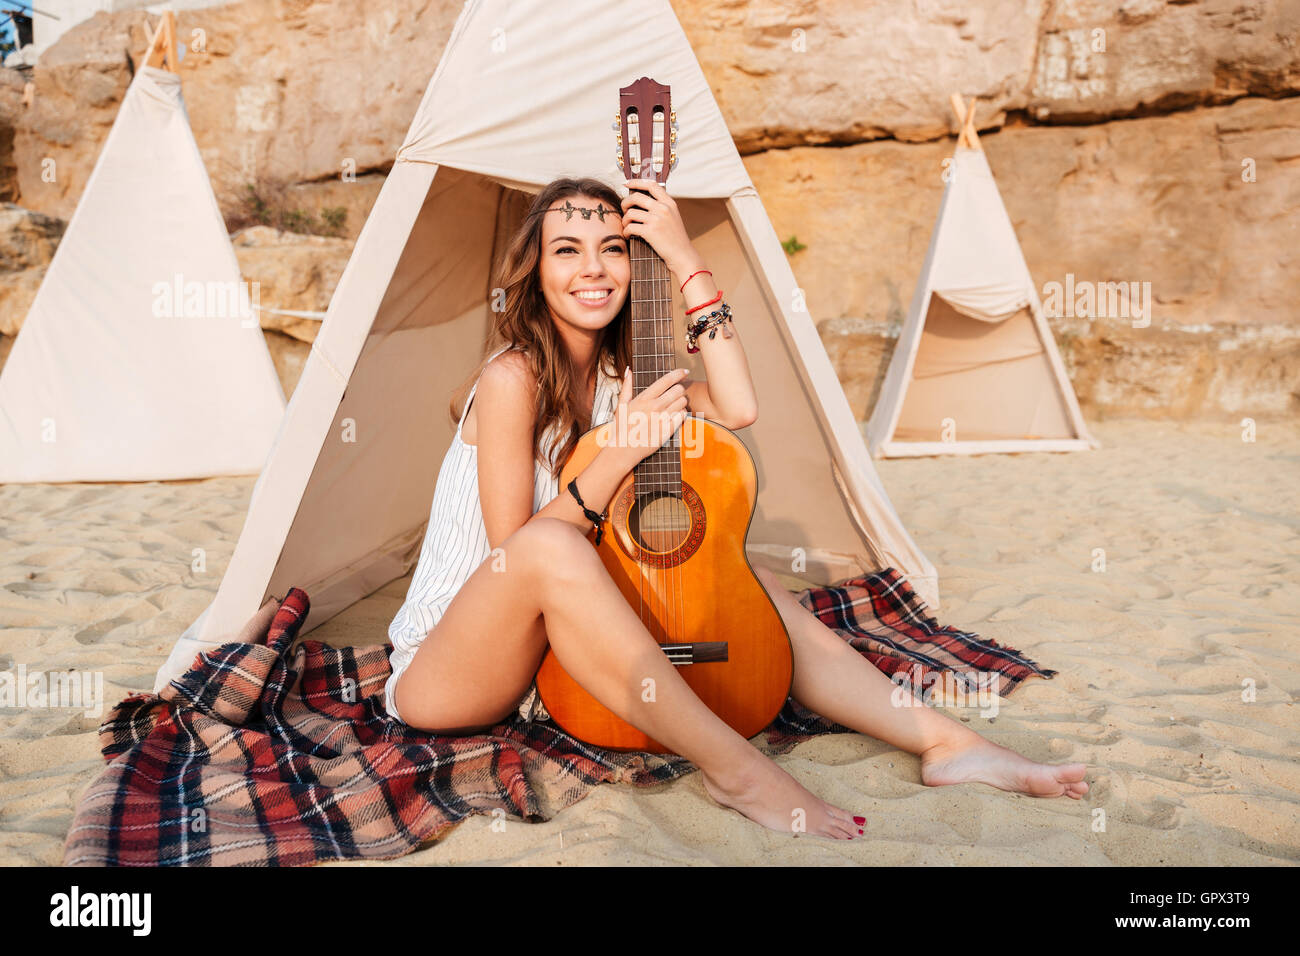 Smiling young hippie woman posing with guitar at the beach tent Stock Photo